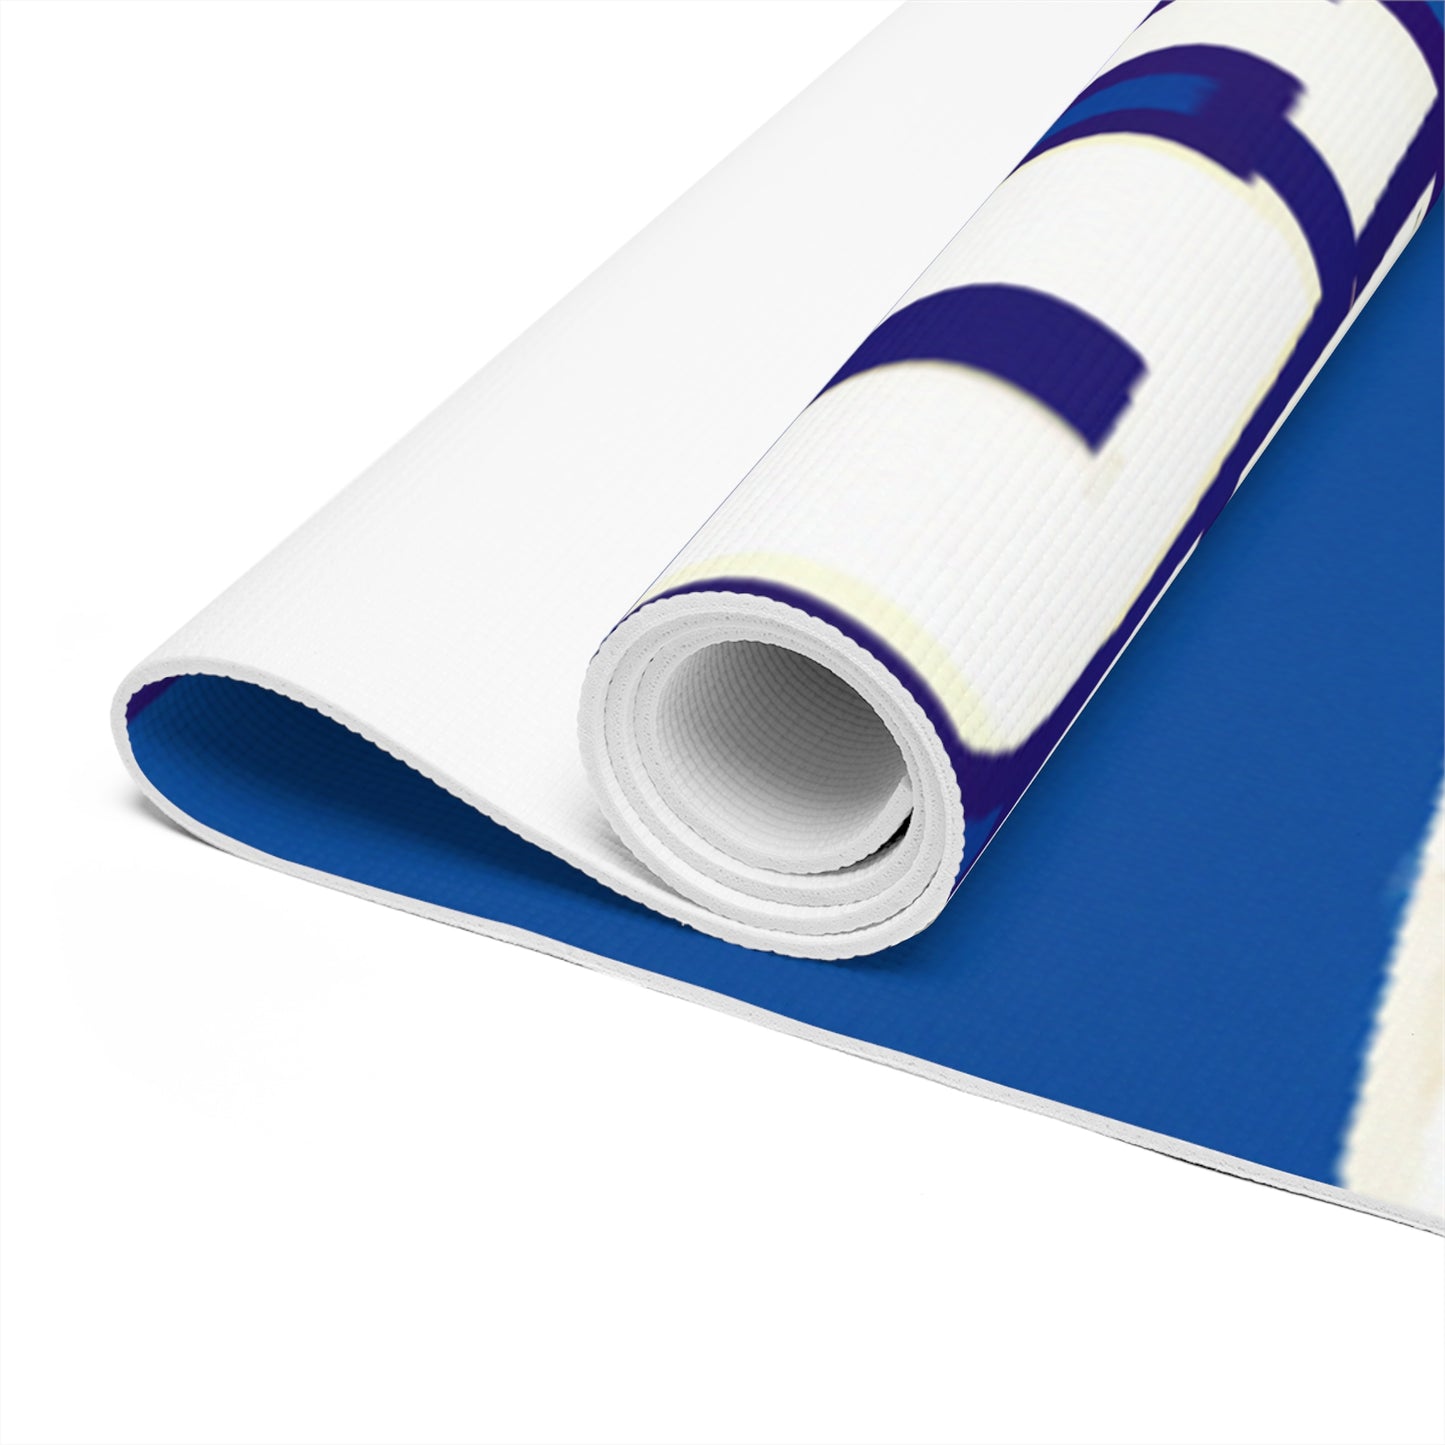 The Thrill of the Game: A Dynamic Visual of a Sporting Event - Go Plus Foam Yoga Mat